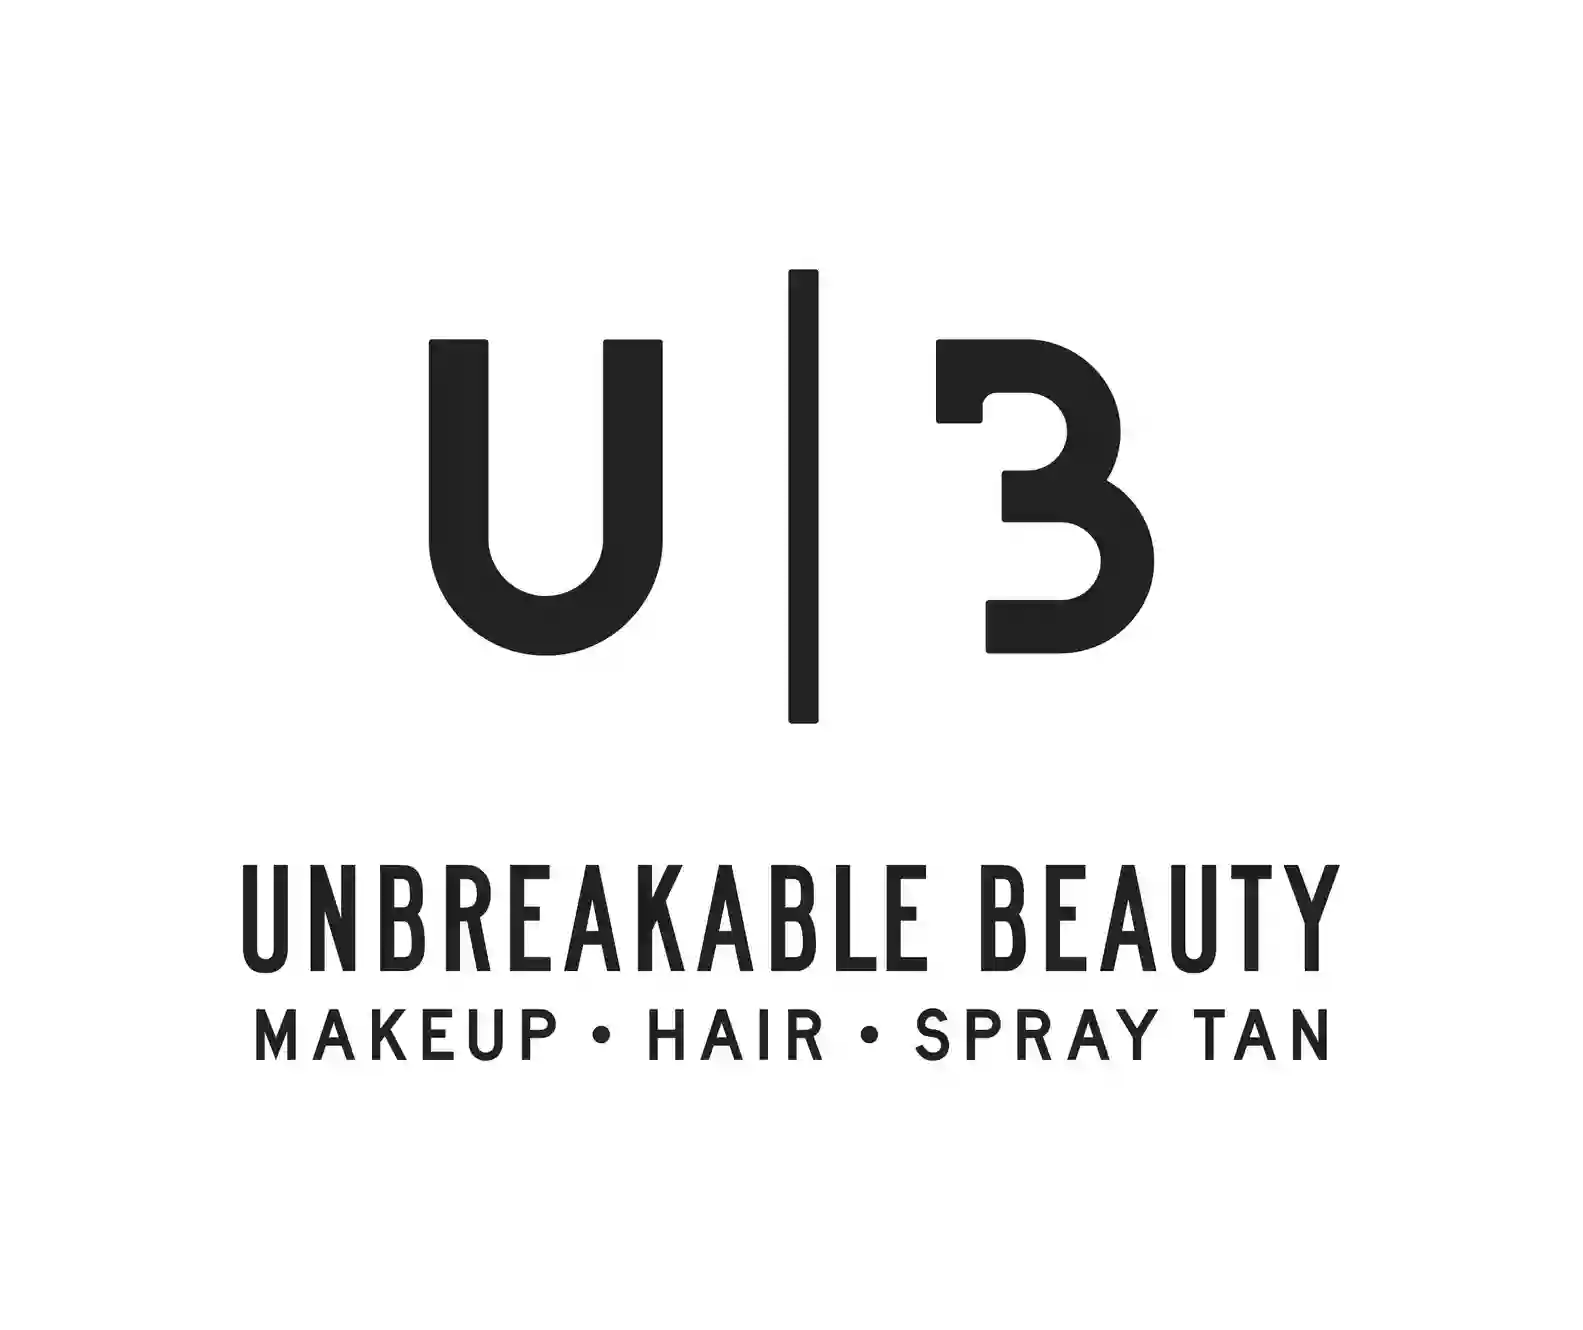 Unbreakable Beauty - makeup, spray tanning, hair styling